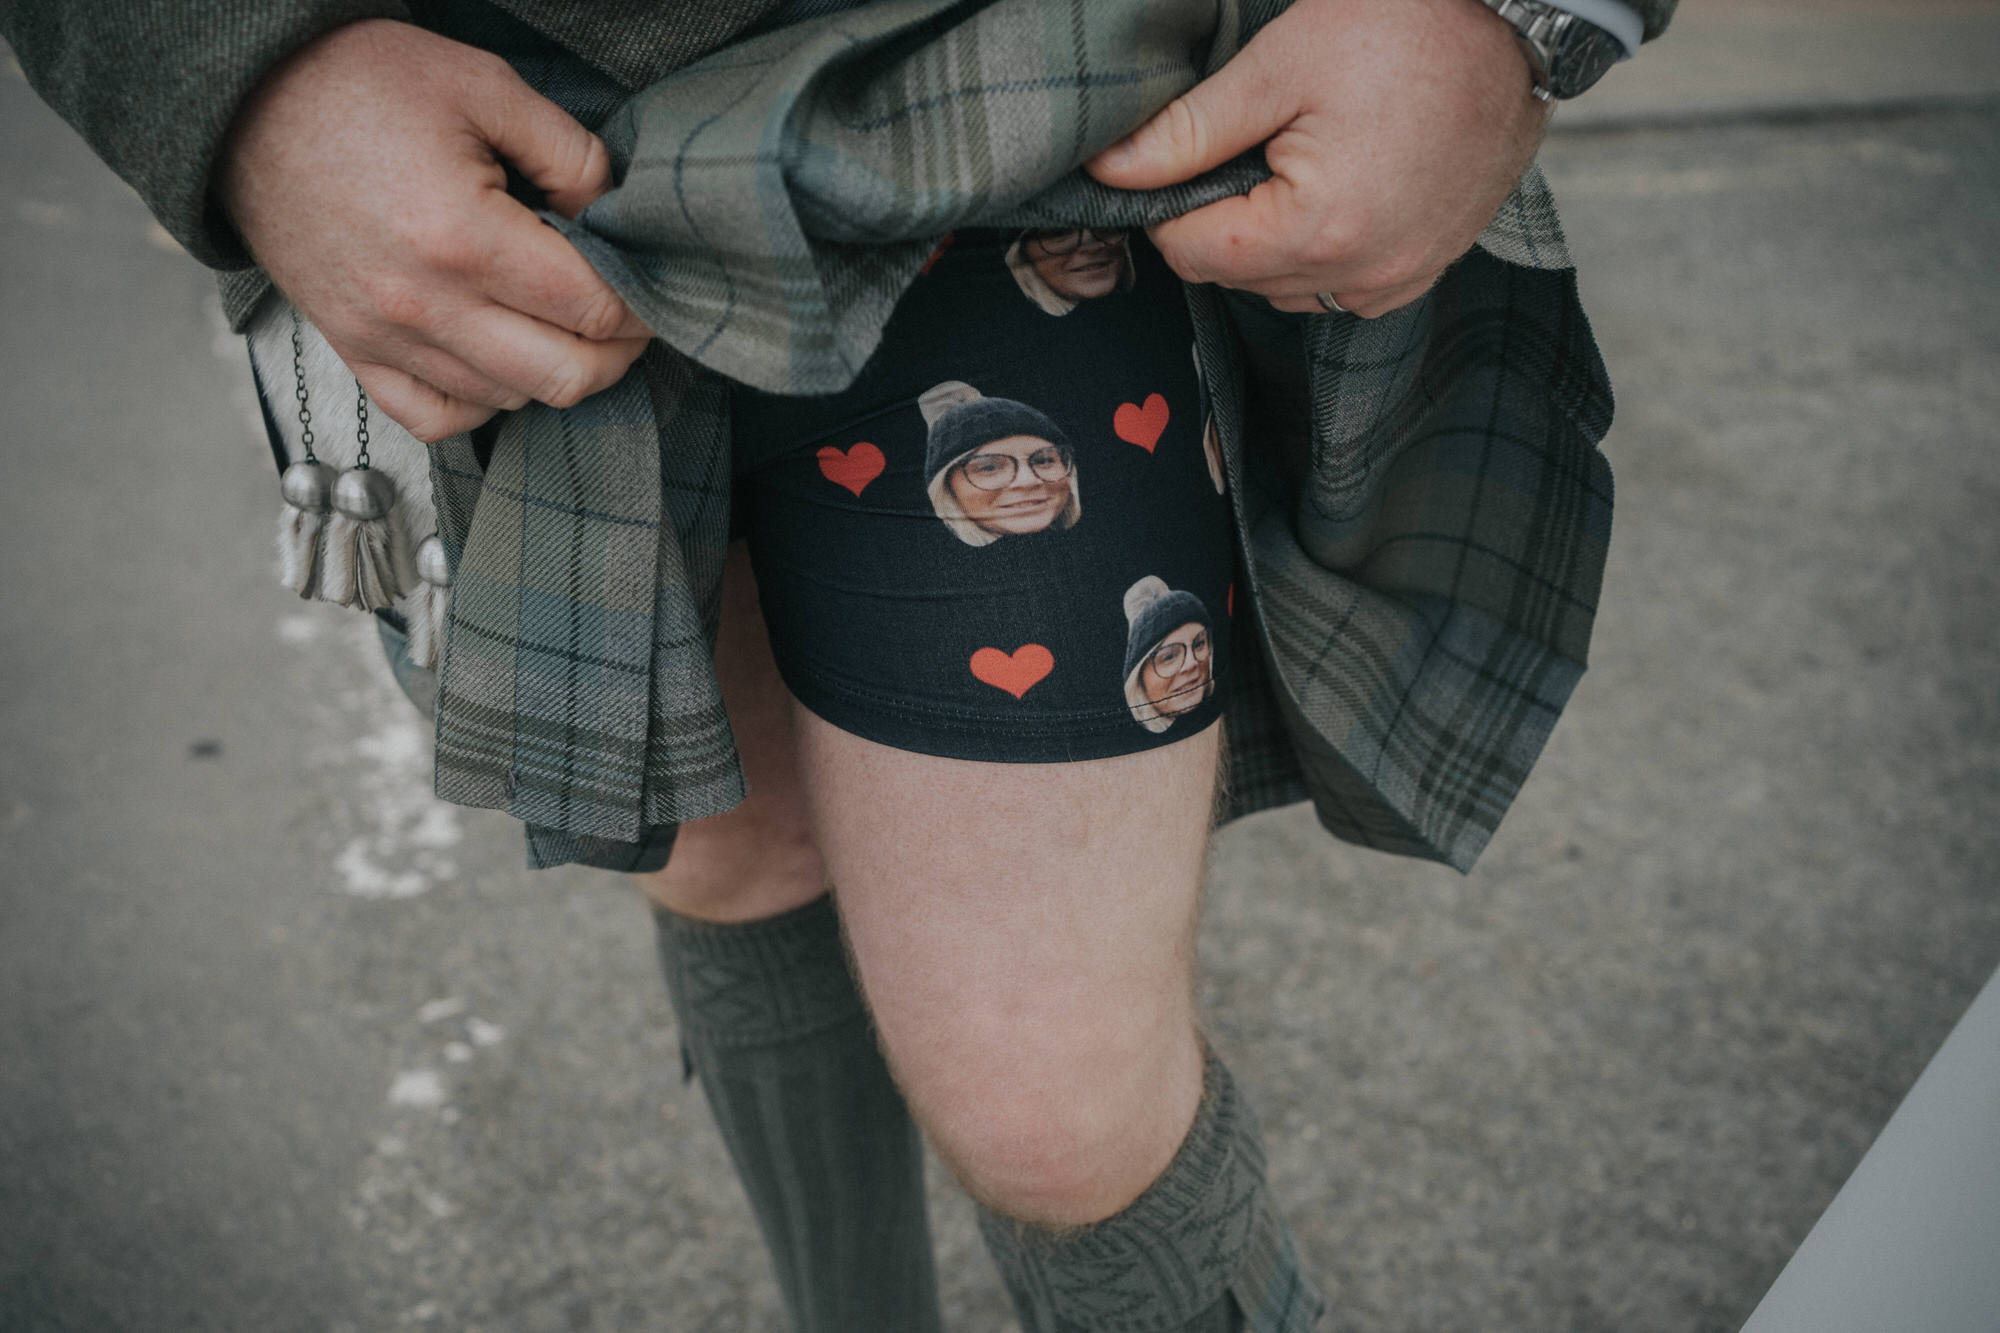 A groom shows off his boxer shorts - they have hearts and pictures of his new wife's face on them